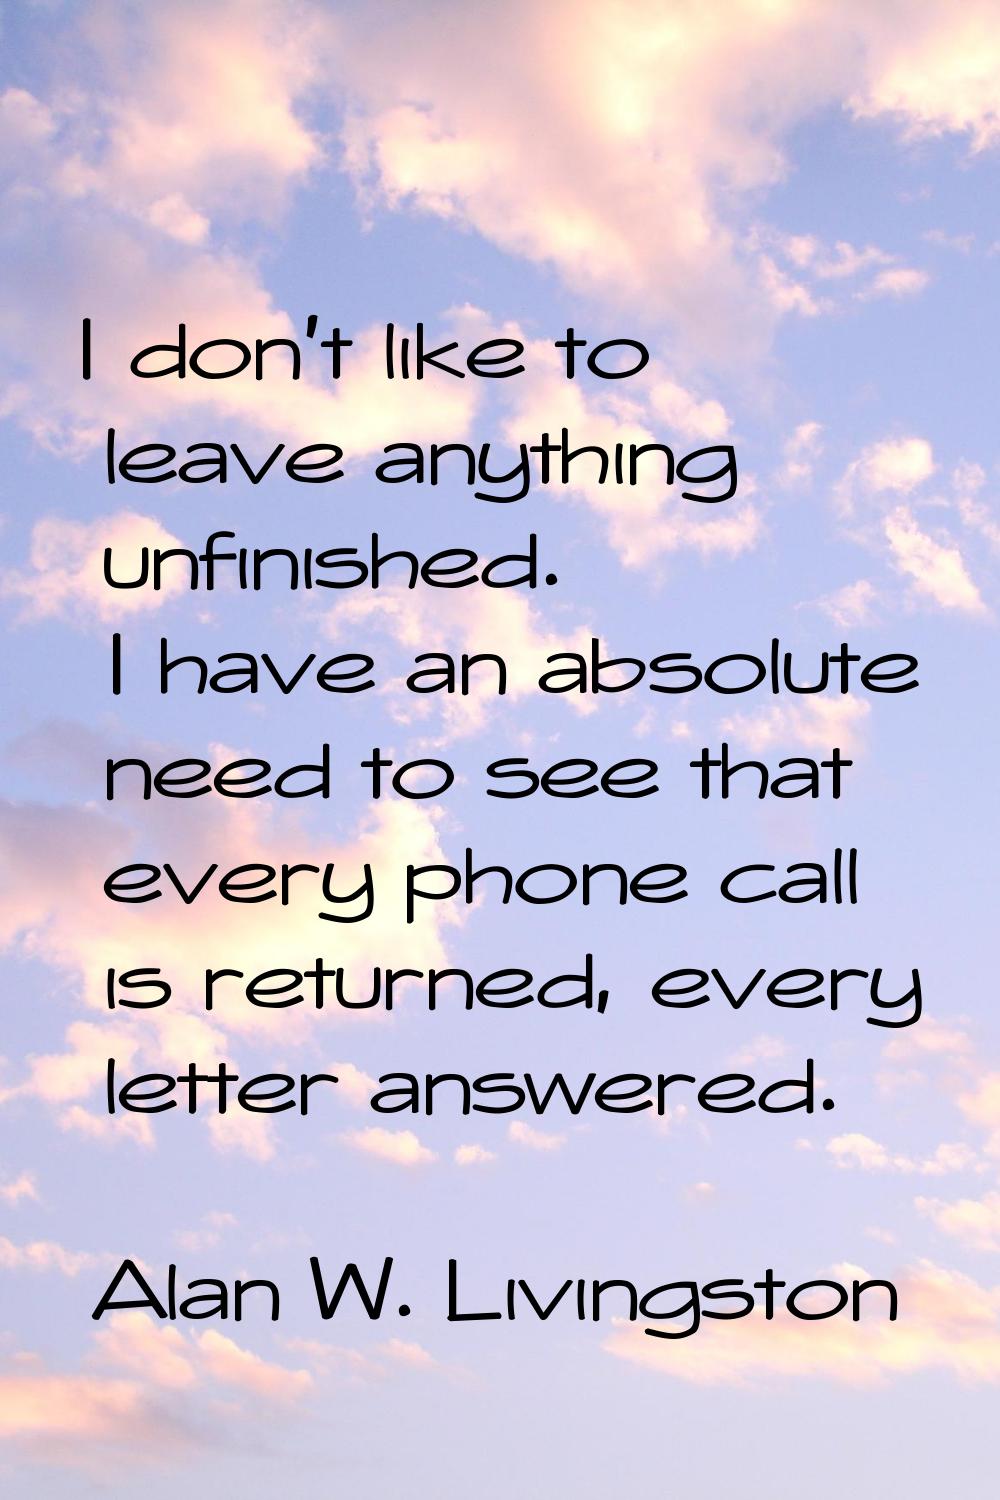 I don't like to leave anything unfinished. I have an absolute need to see that every phone call is 